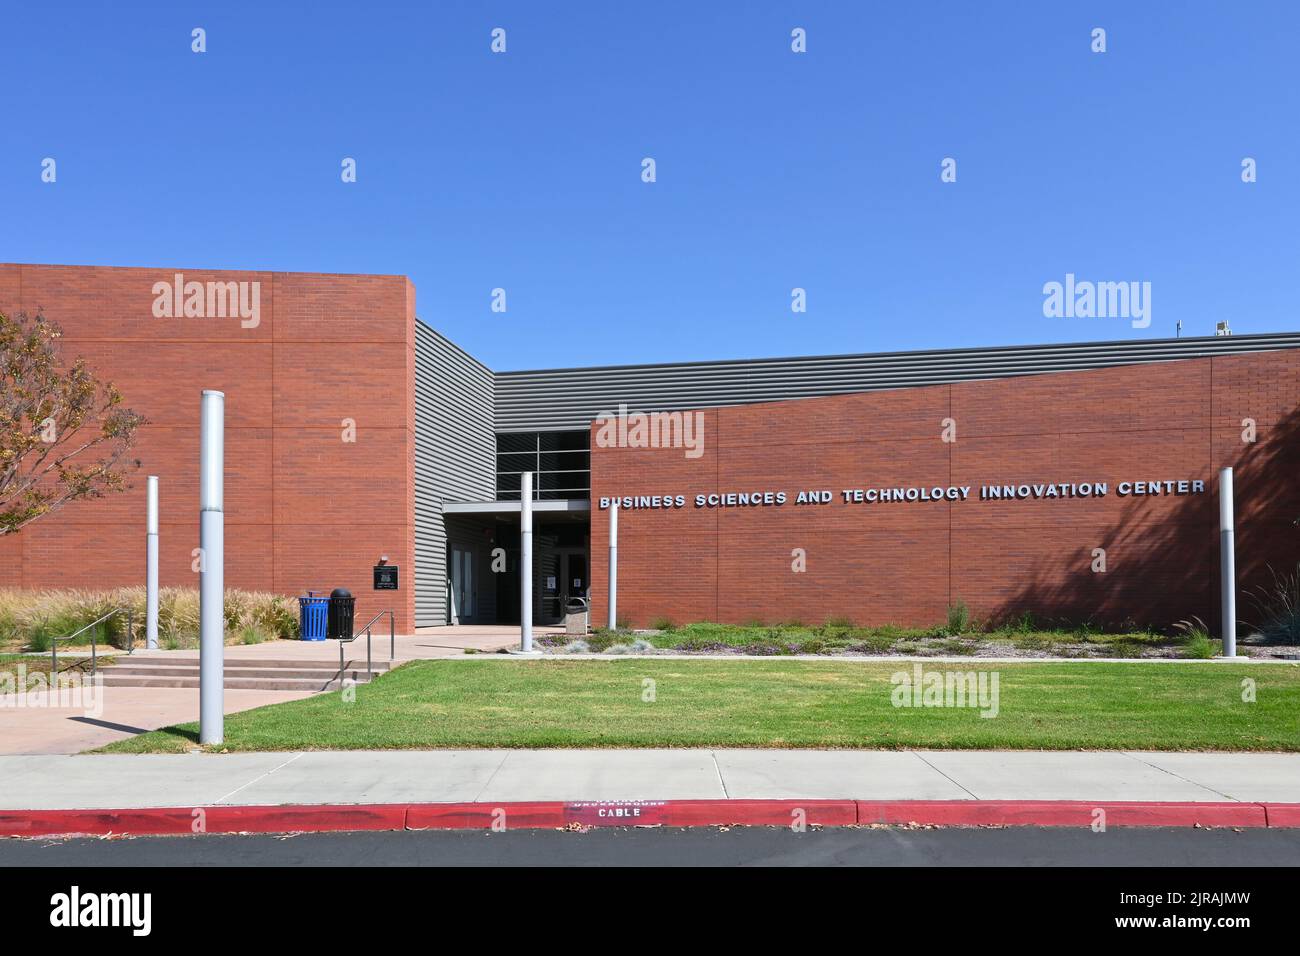 IRVINE, CALIFORNIA - 21 AUG 2022: The Business Sciences and Technology Innovation Center on the Campus of Irvine Valley College, IVC. Stock Photo